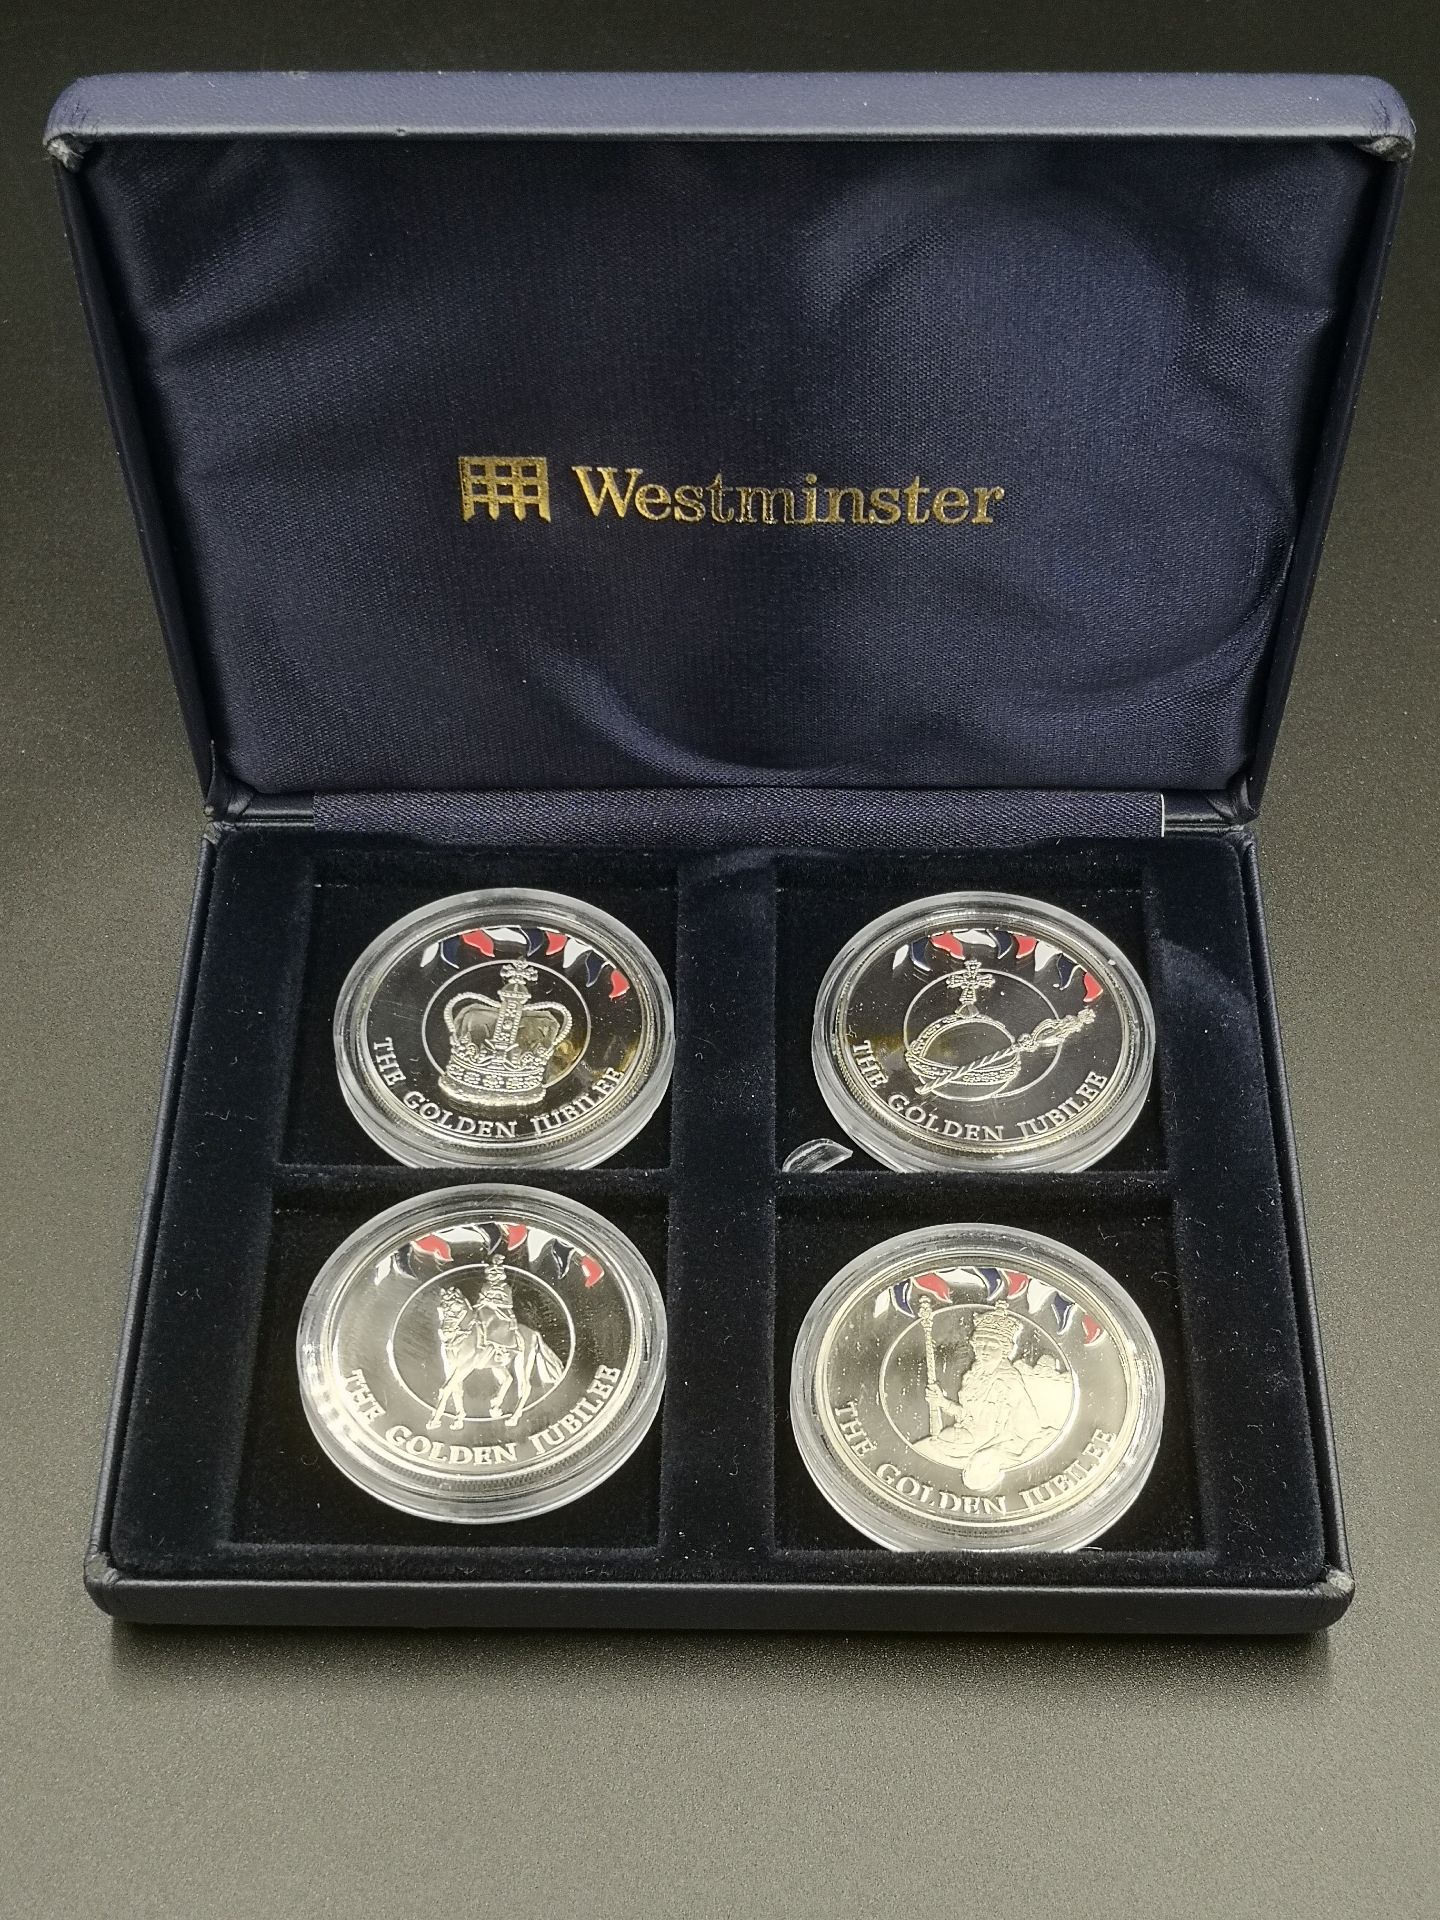 Westminster Diamond Wedding silver proof pair and other coins - Image 3 of 4